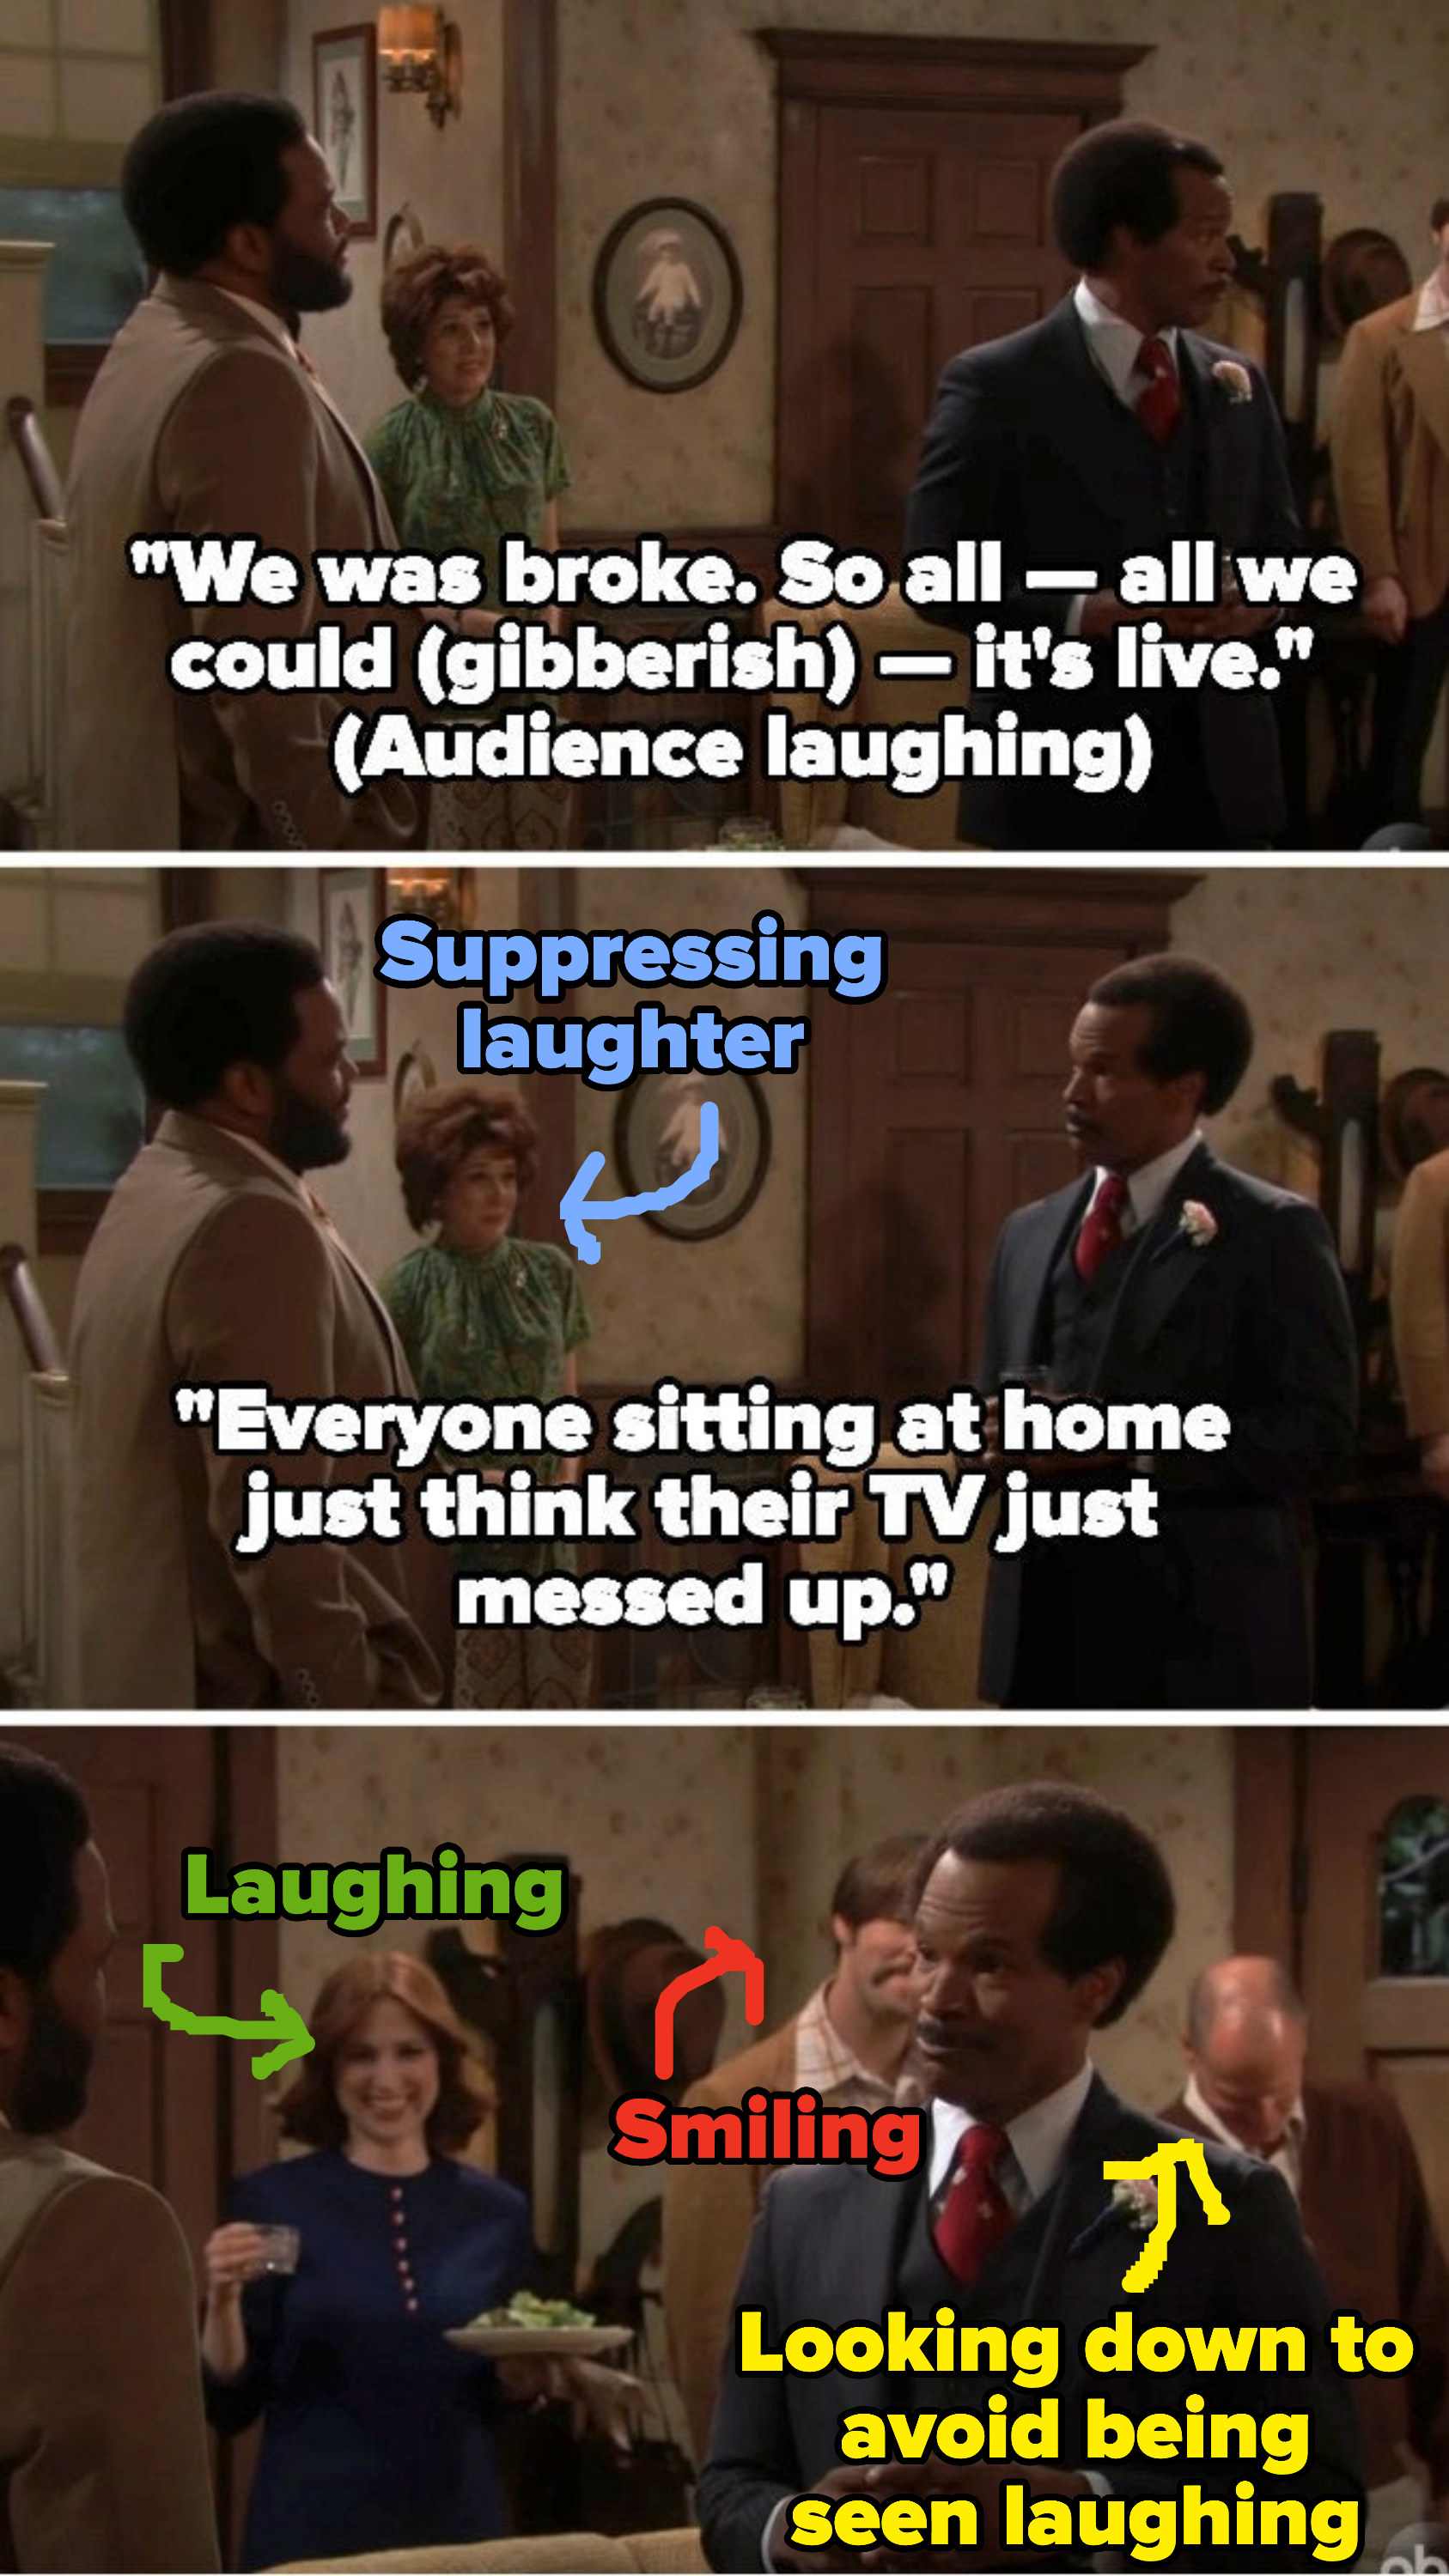 Jamie speaking gibberish and saying people at home are going to think their TV messed up, and several actors in the background start laughing